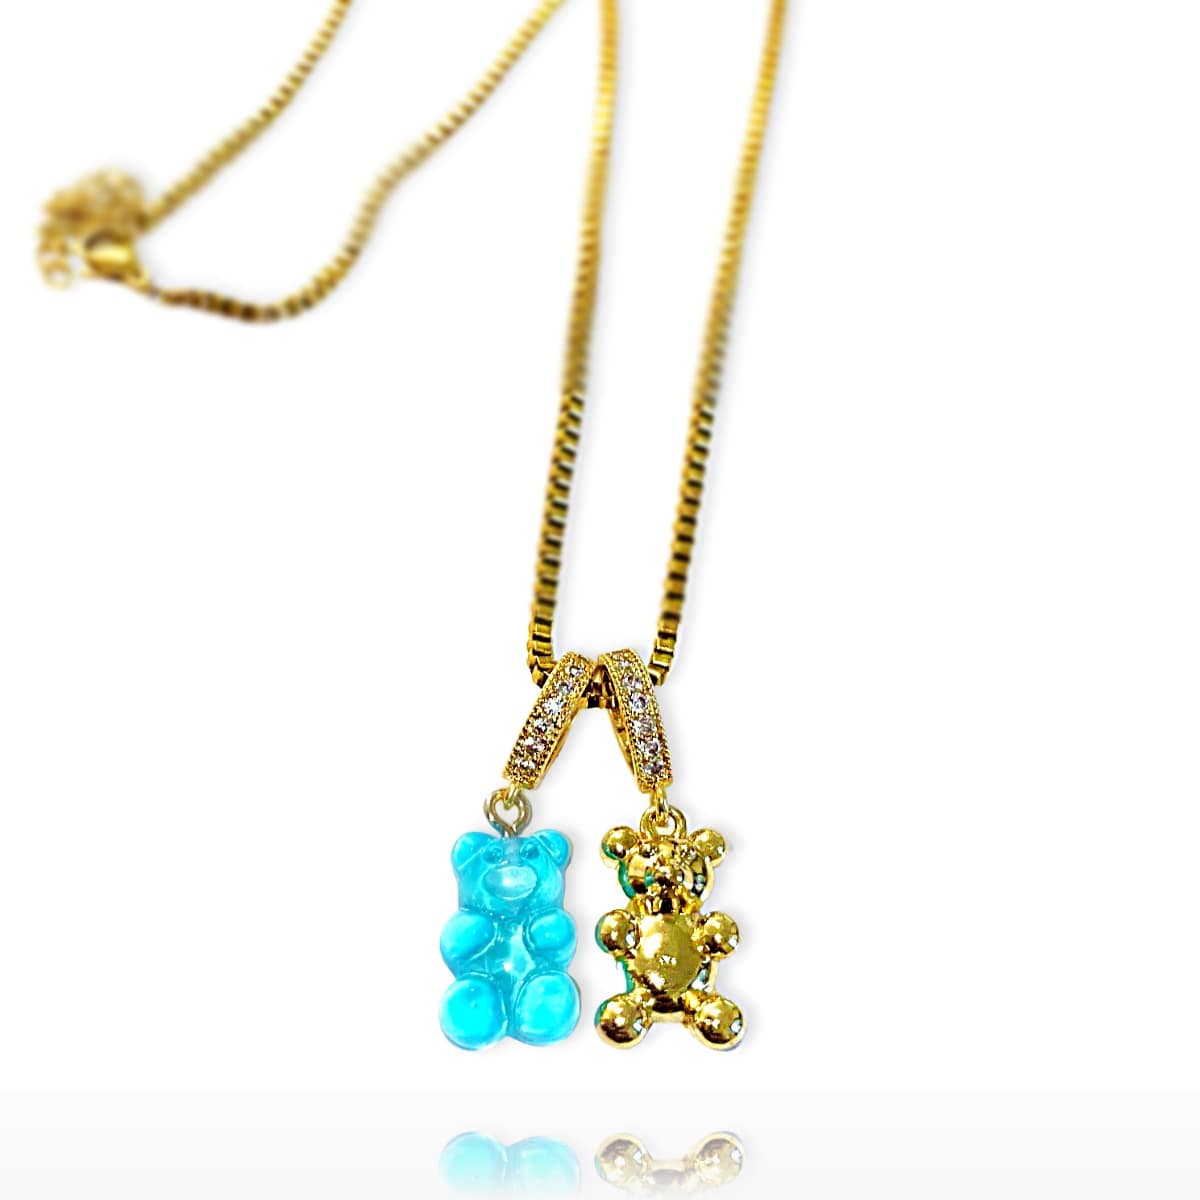 Blue & Gold Mixed Double Bear Necklace - Gummy Bear Bling